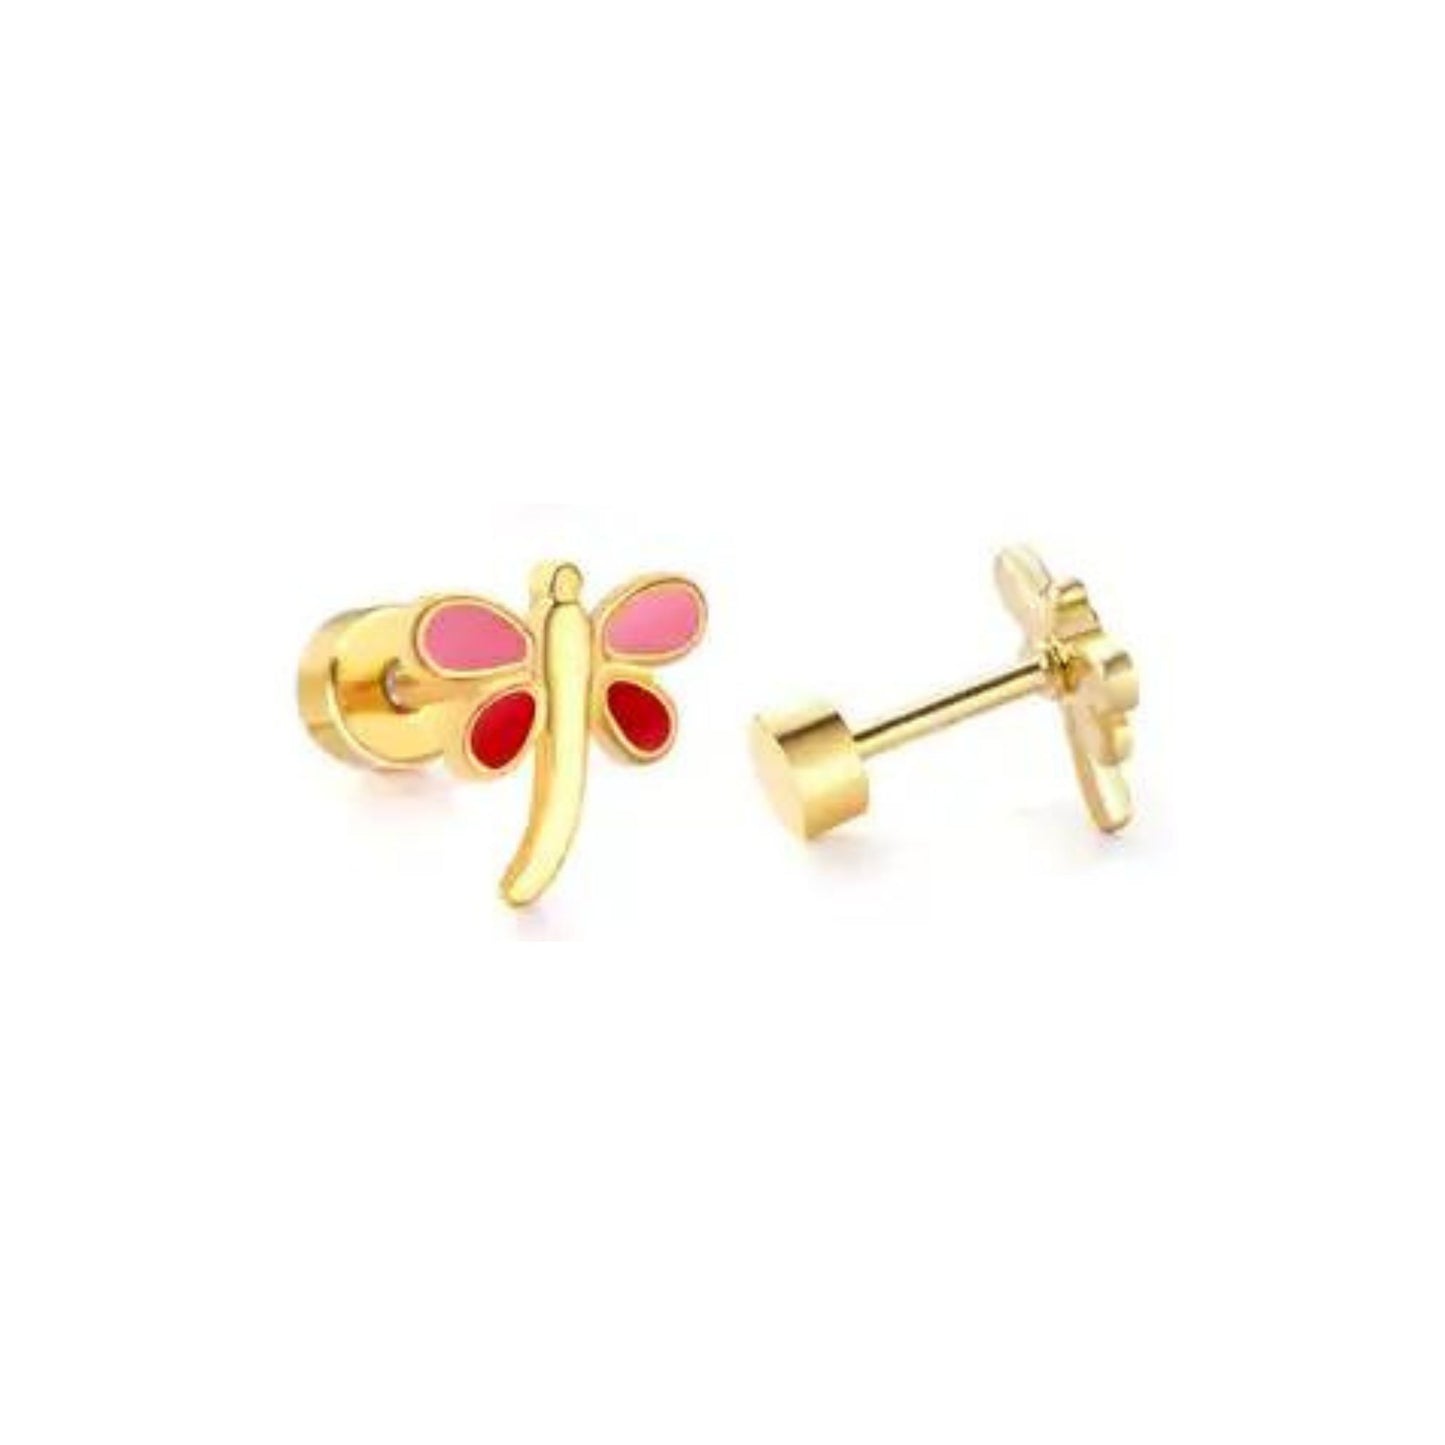 Screwback Stud - Bri Butterfly - Pink and Red